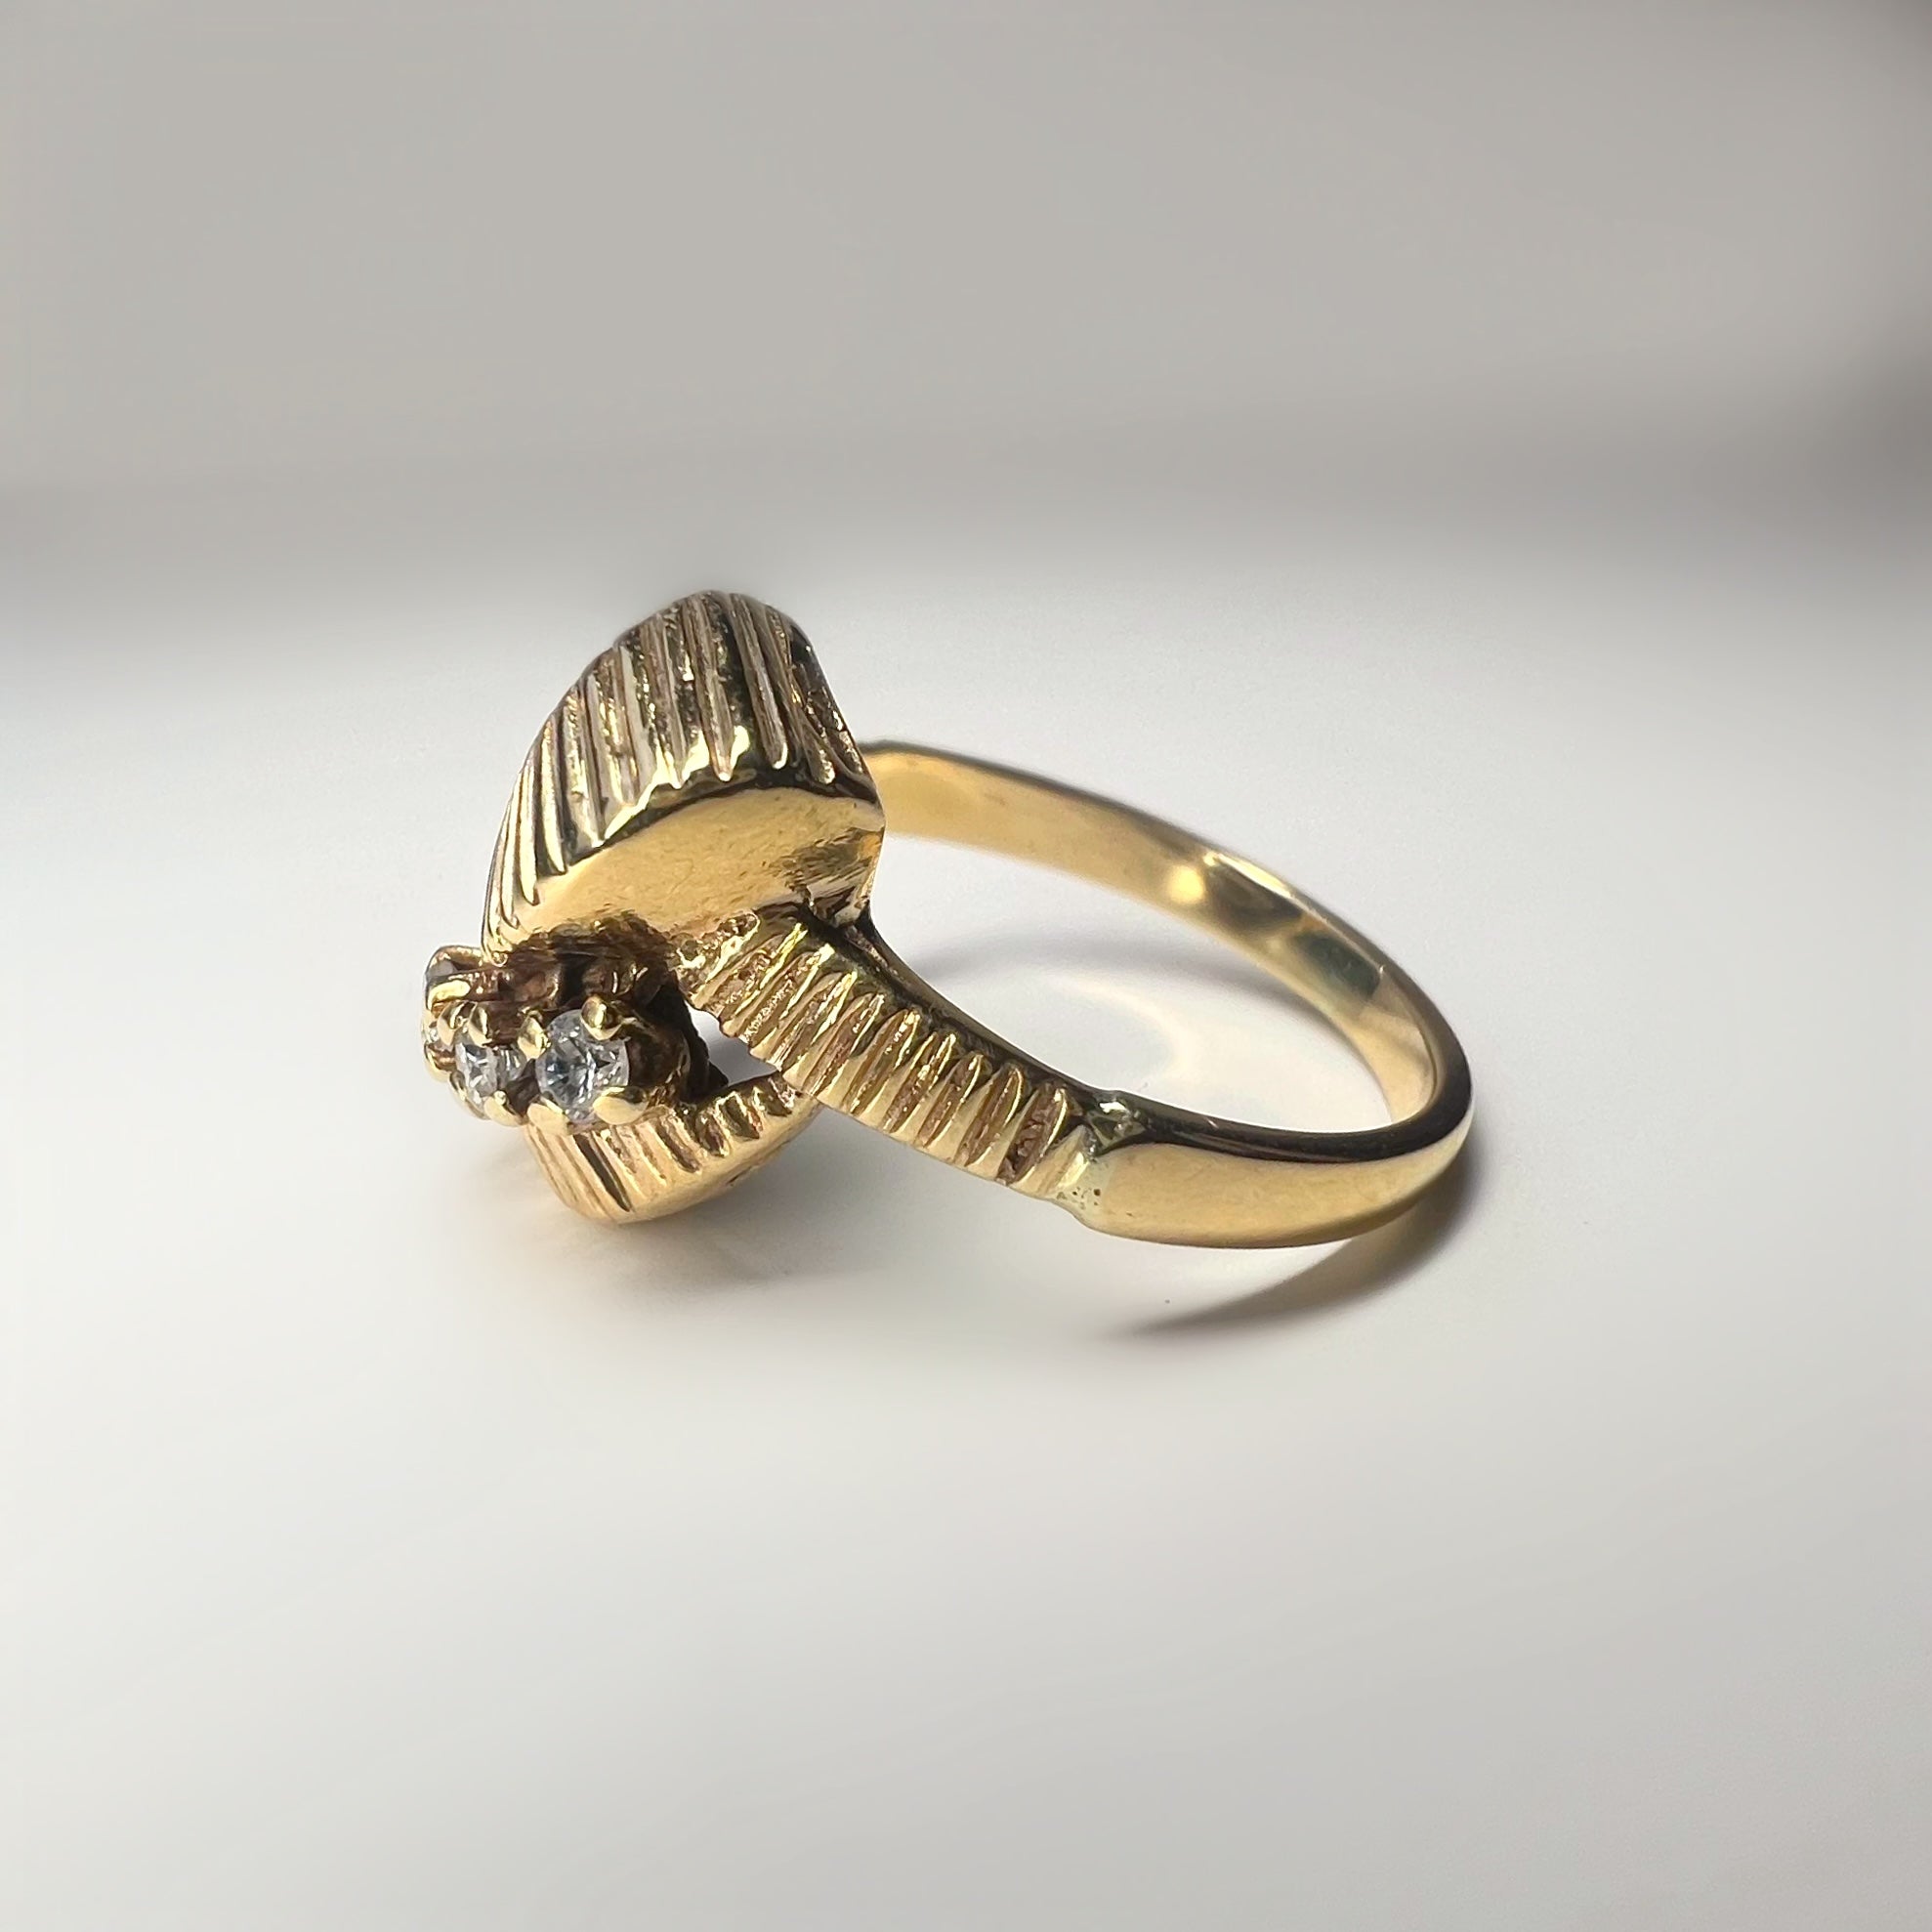 Vintage 9ct Gold and Diamond Knot Ring